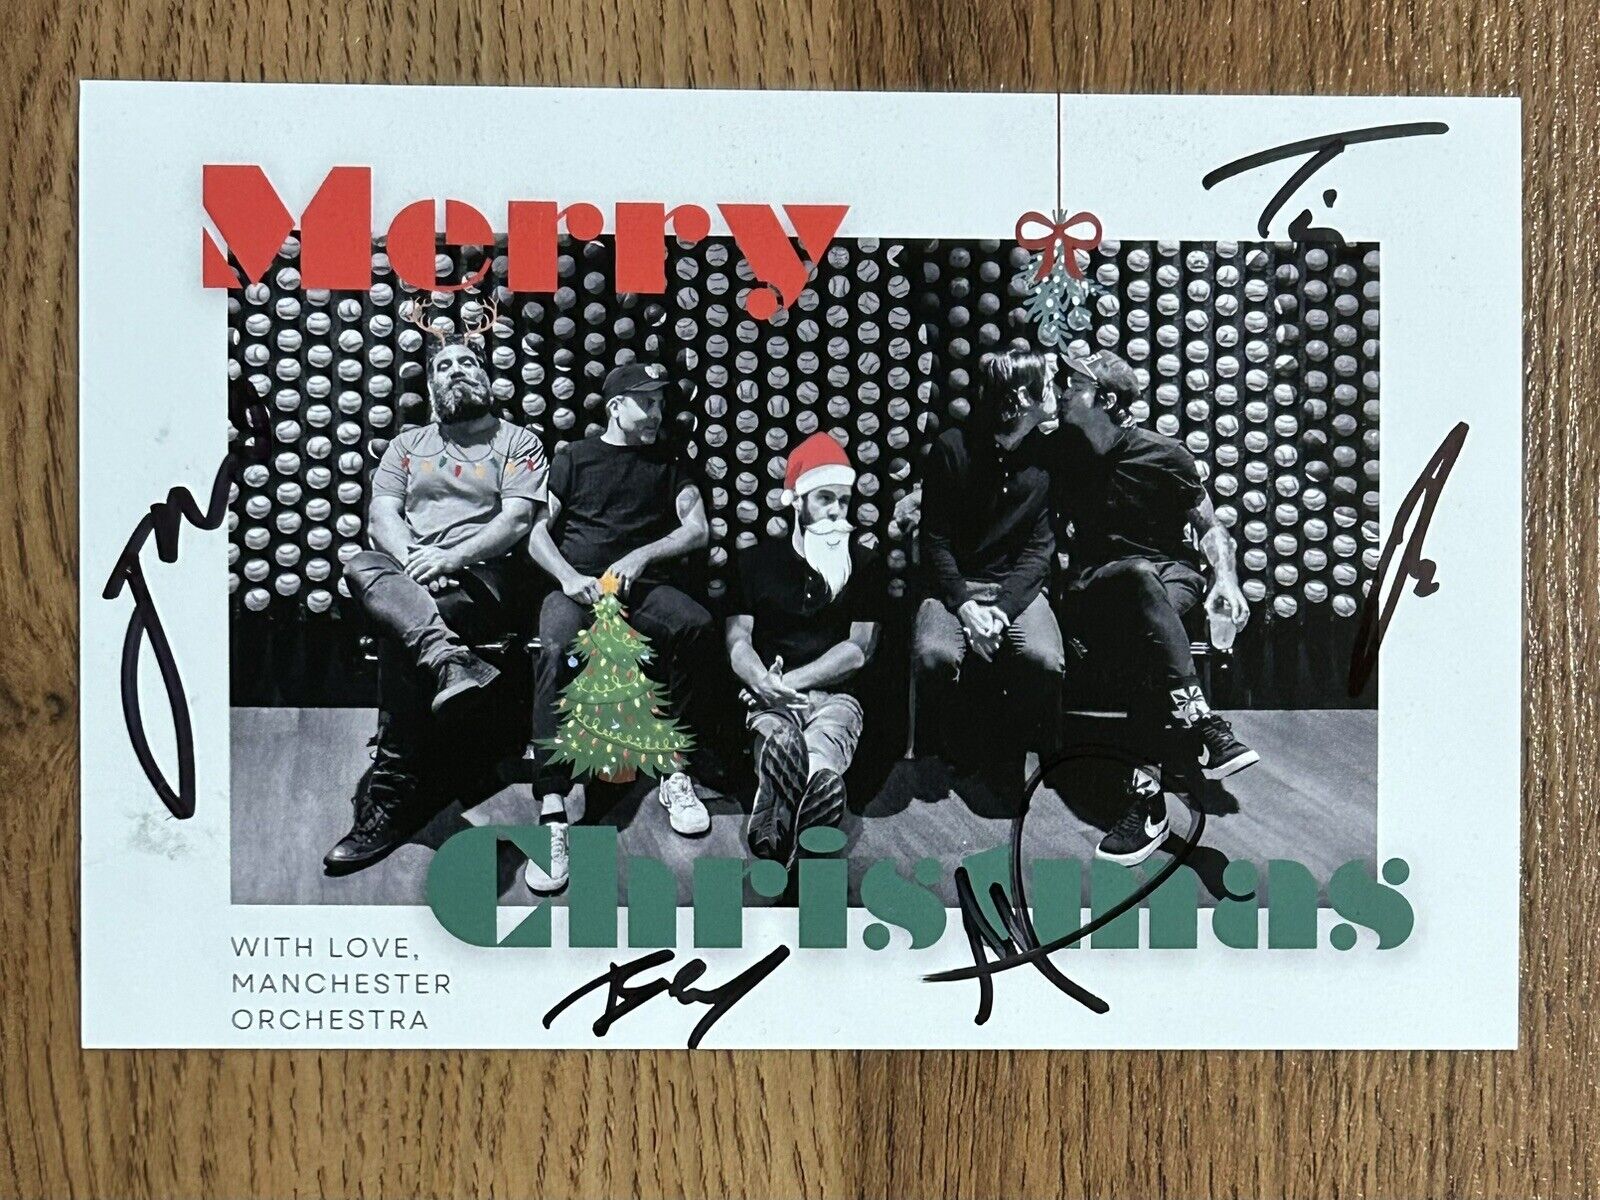 Manchester Orchestra SIGNED / AUTOGRAPHED Christmas card Rare 